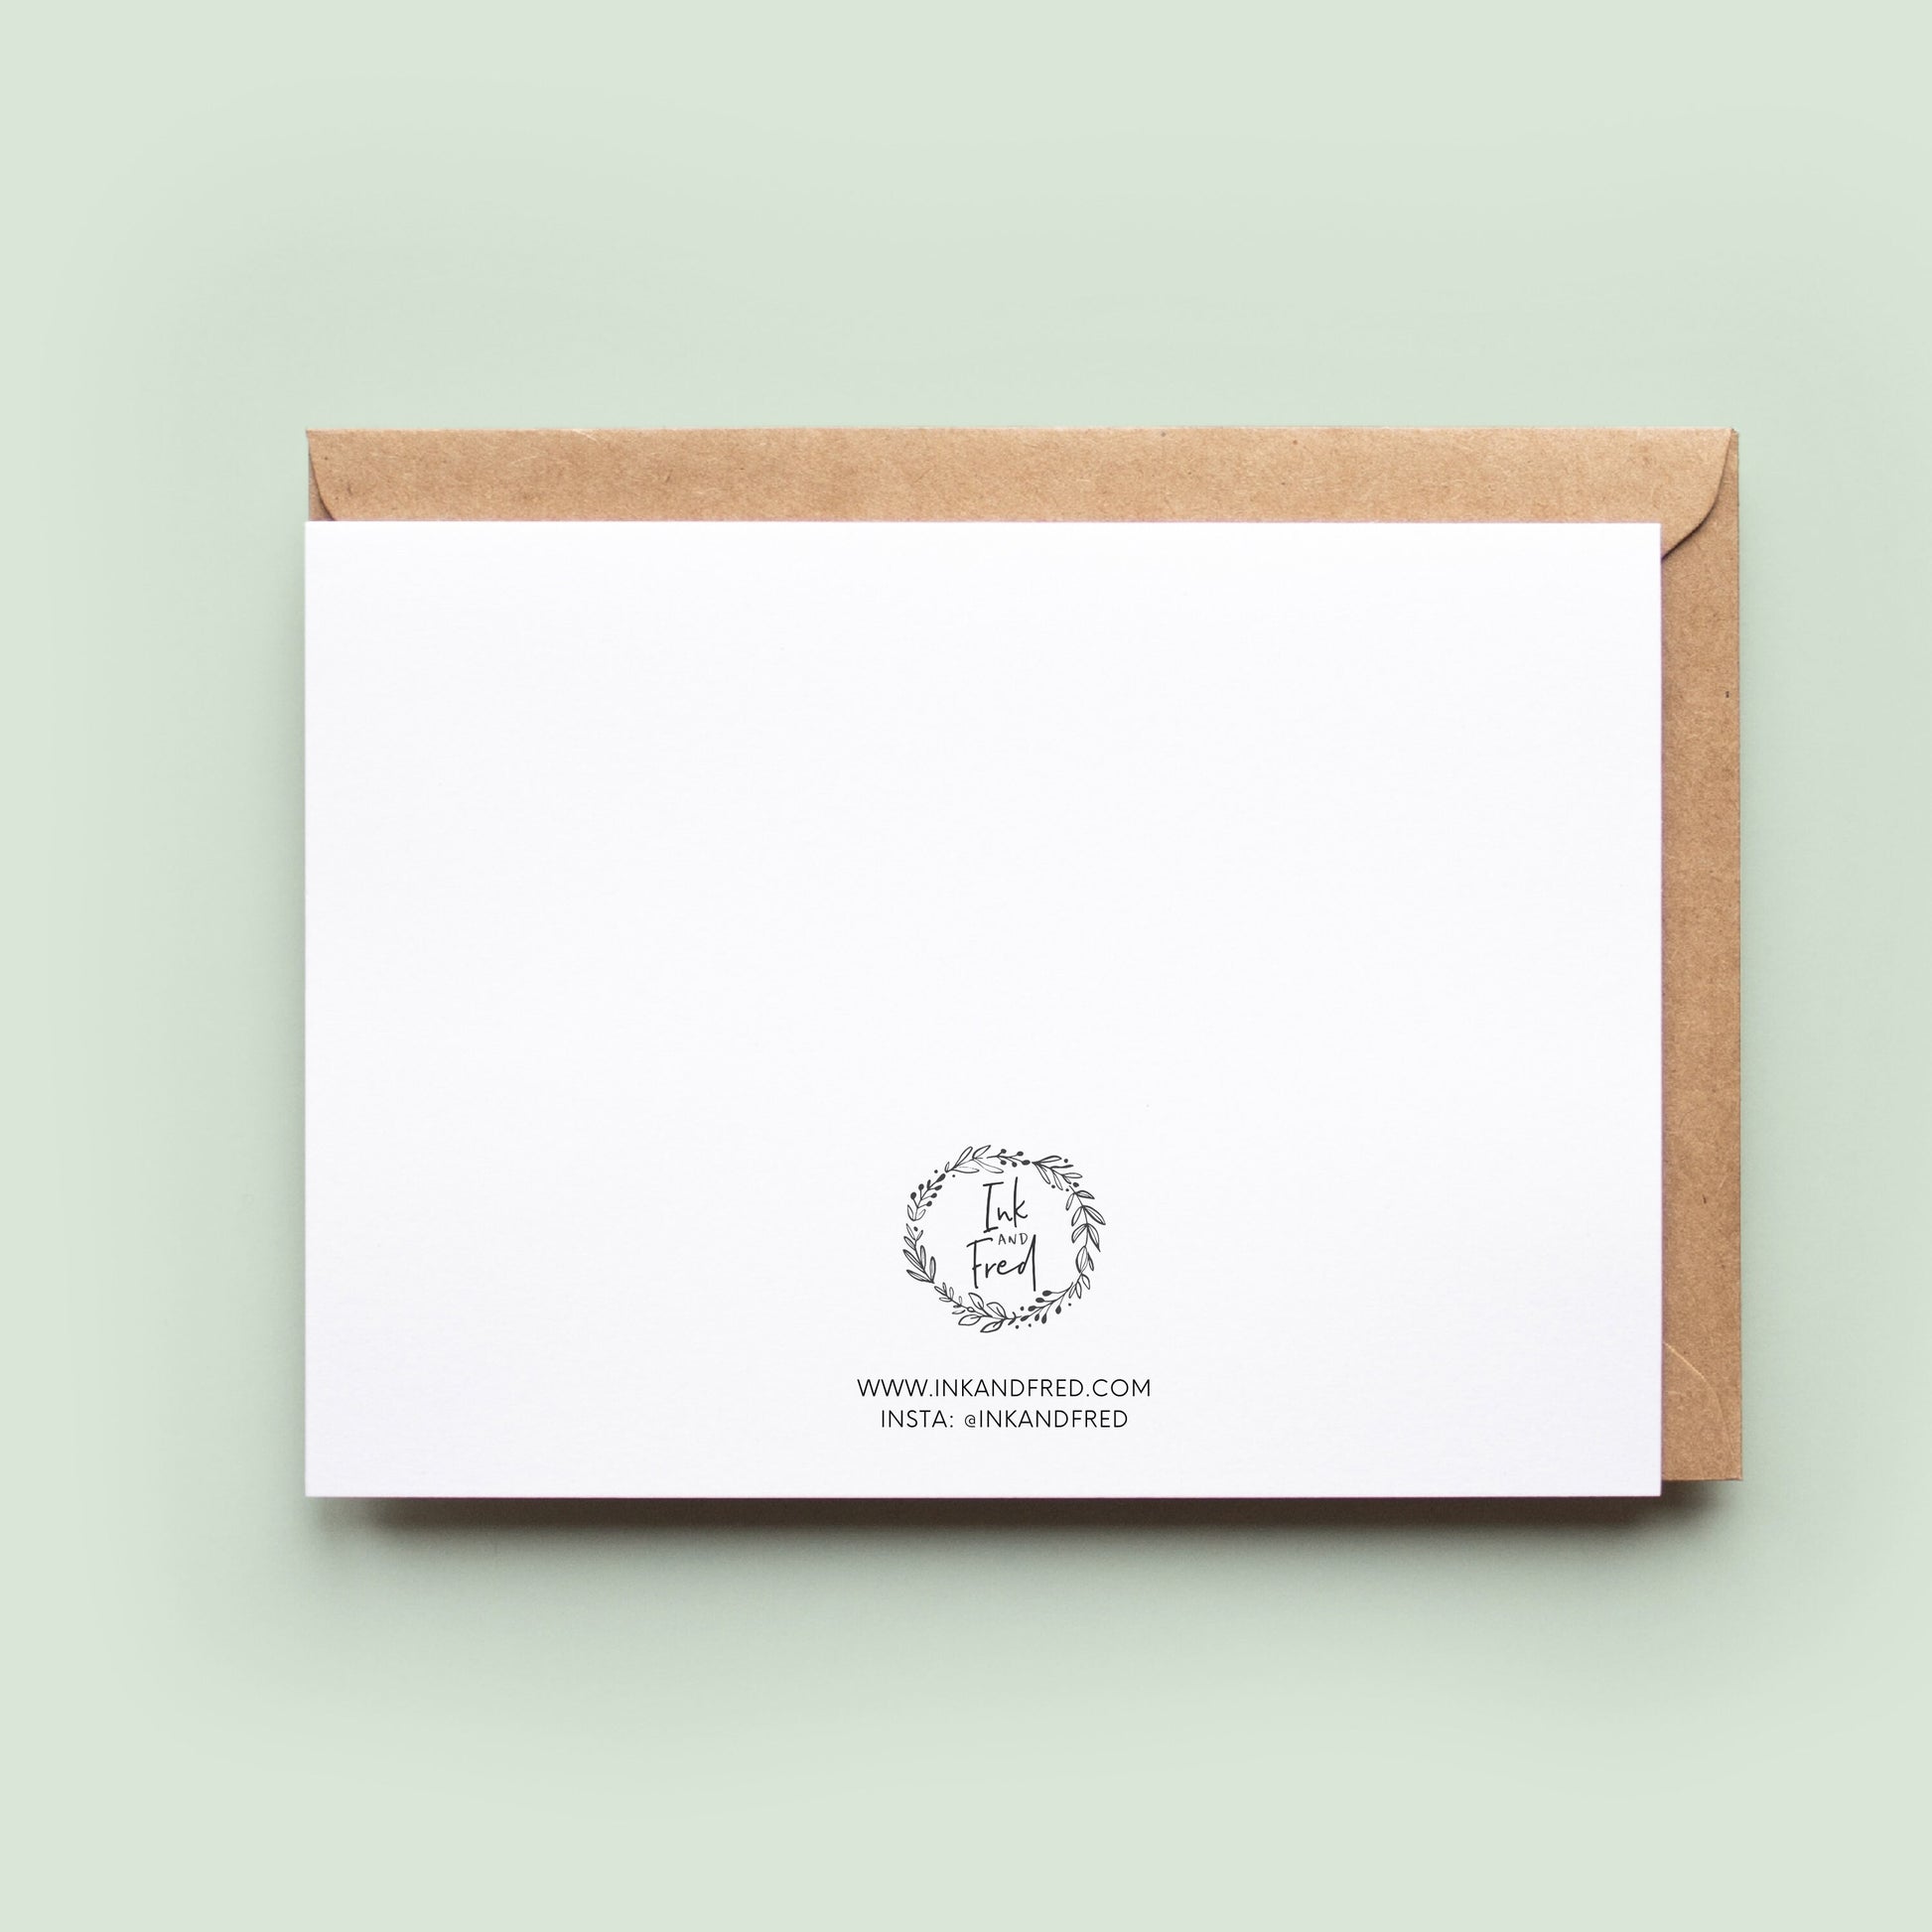 Personalised Twins Page Boy Thank You Card, Brothers Page Boy Thank You Card, Personalised Page Boy Card, Thank You For Being My Page Boys